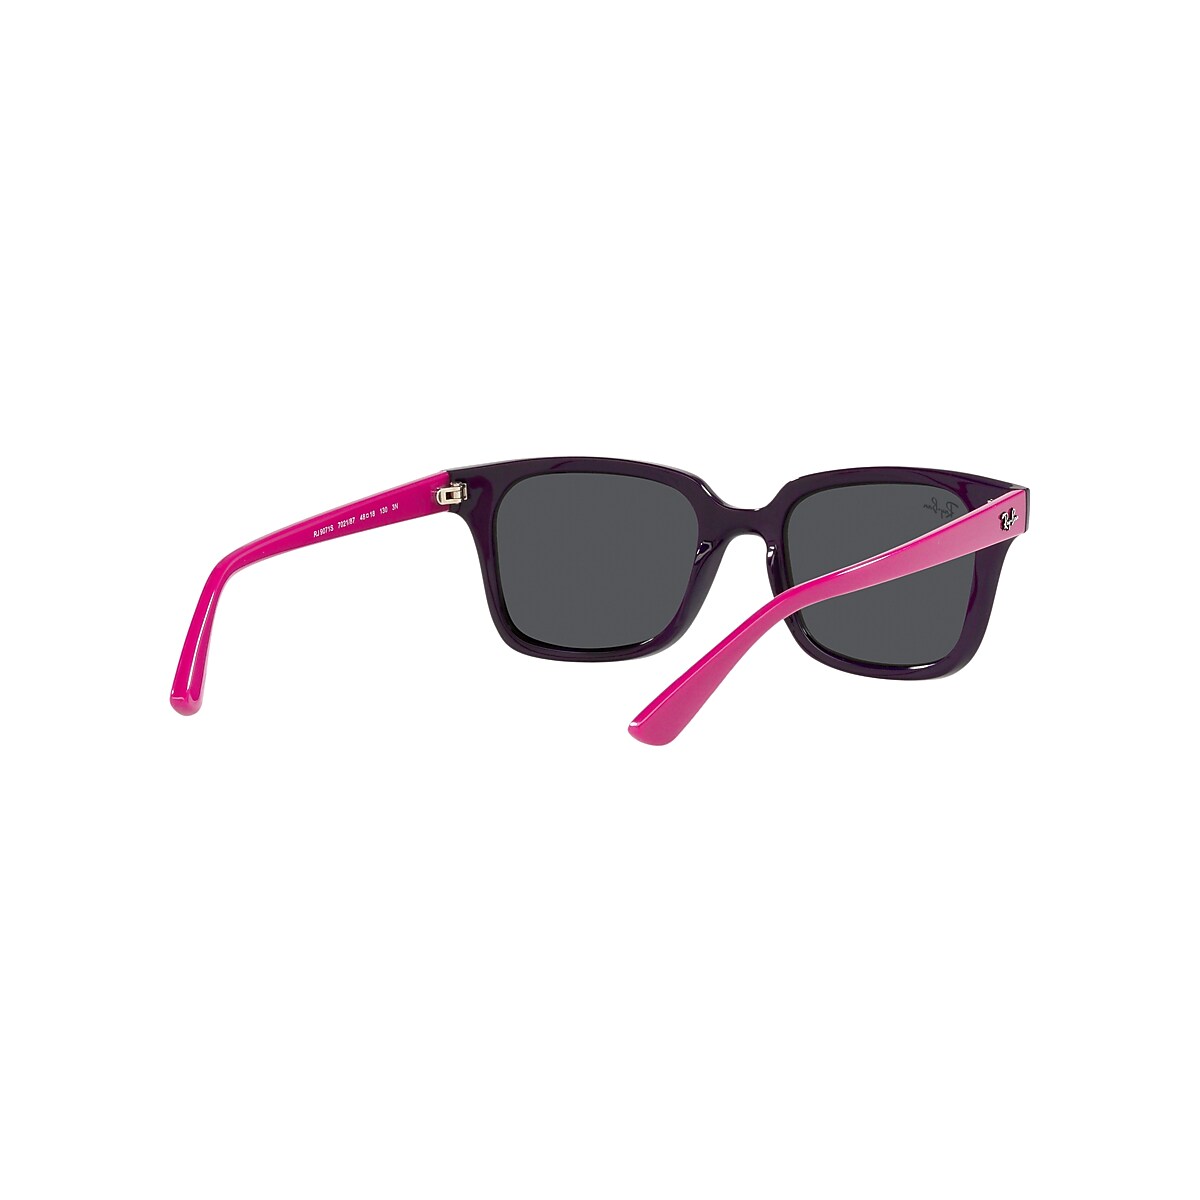 RB9071S KIDS Sunglasses in Purple and Grey - RB9071S | Ray-Ban® US